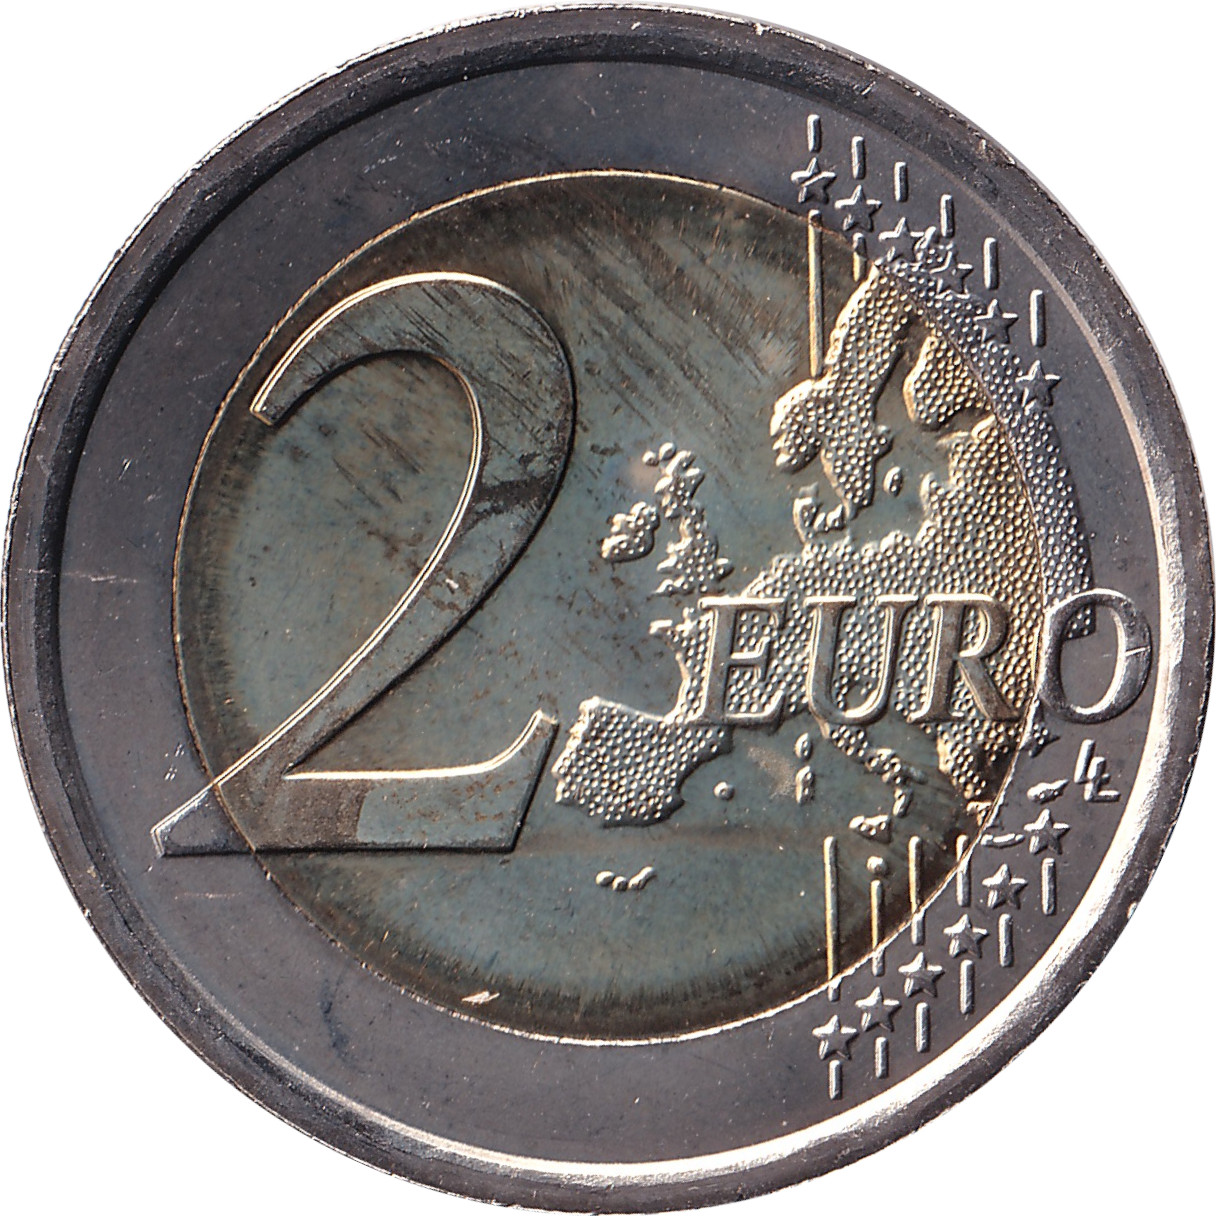 2 euro - Constitution italienne - 70 years